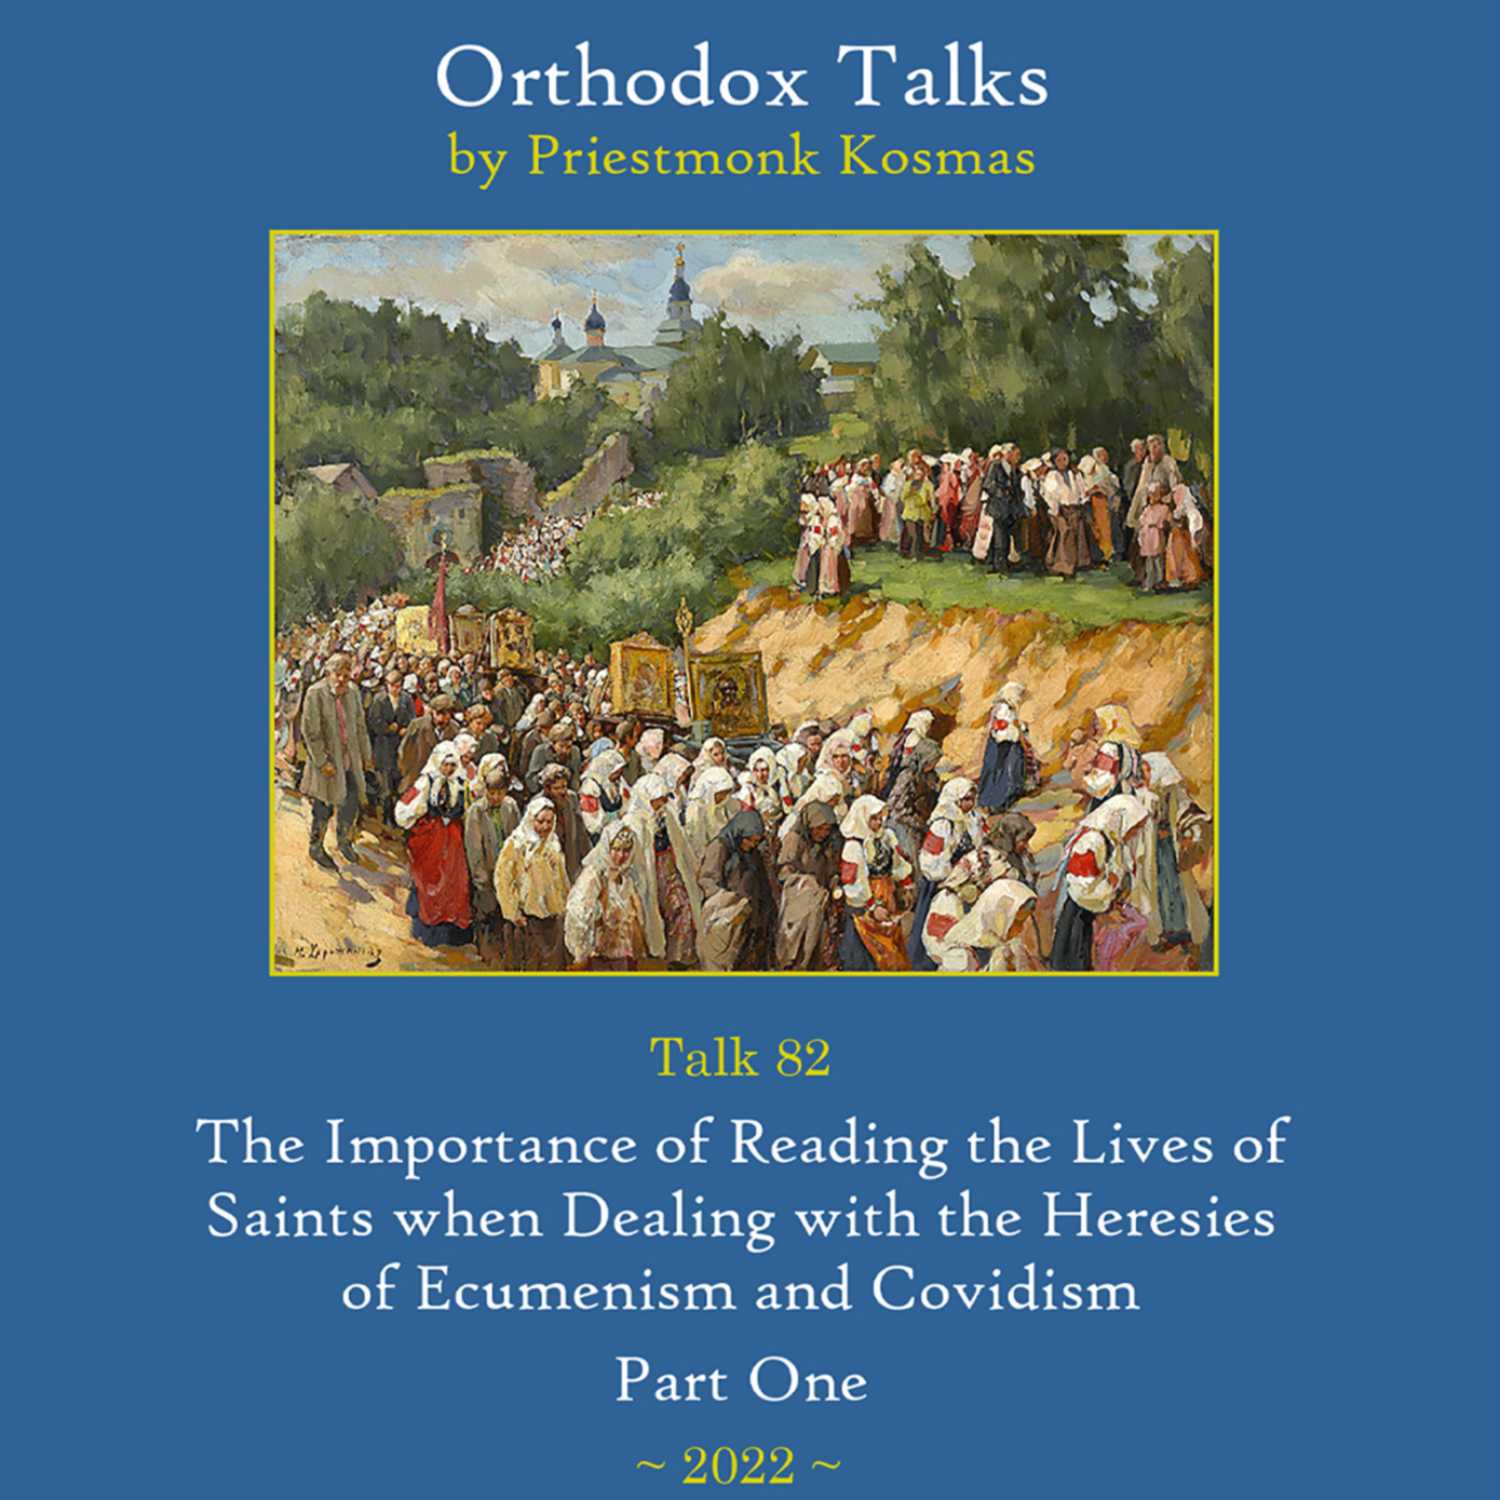 Talk 82: The Importance of Reading the Lives of Saints when Dealing with the Heresies of Ecumenism and Covidism - Part 1